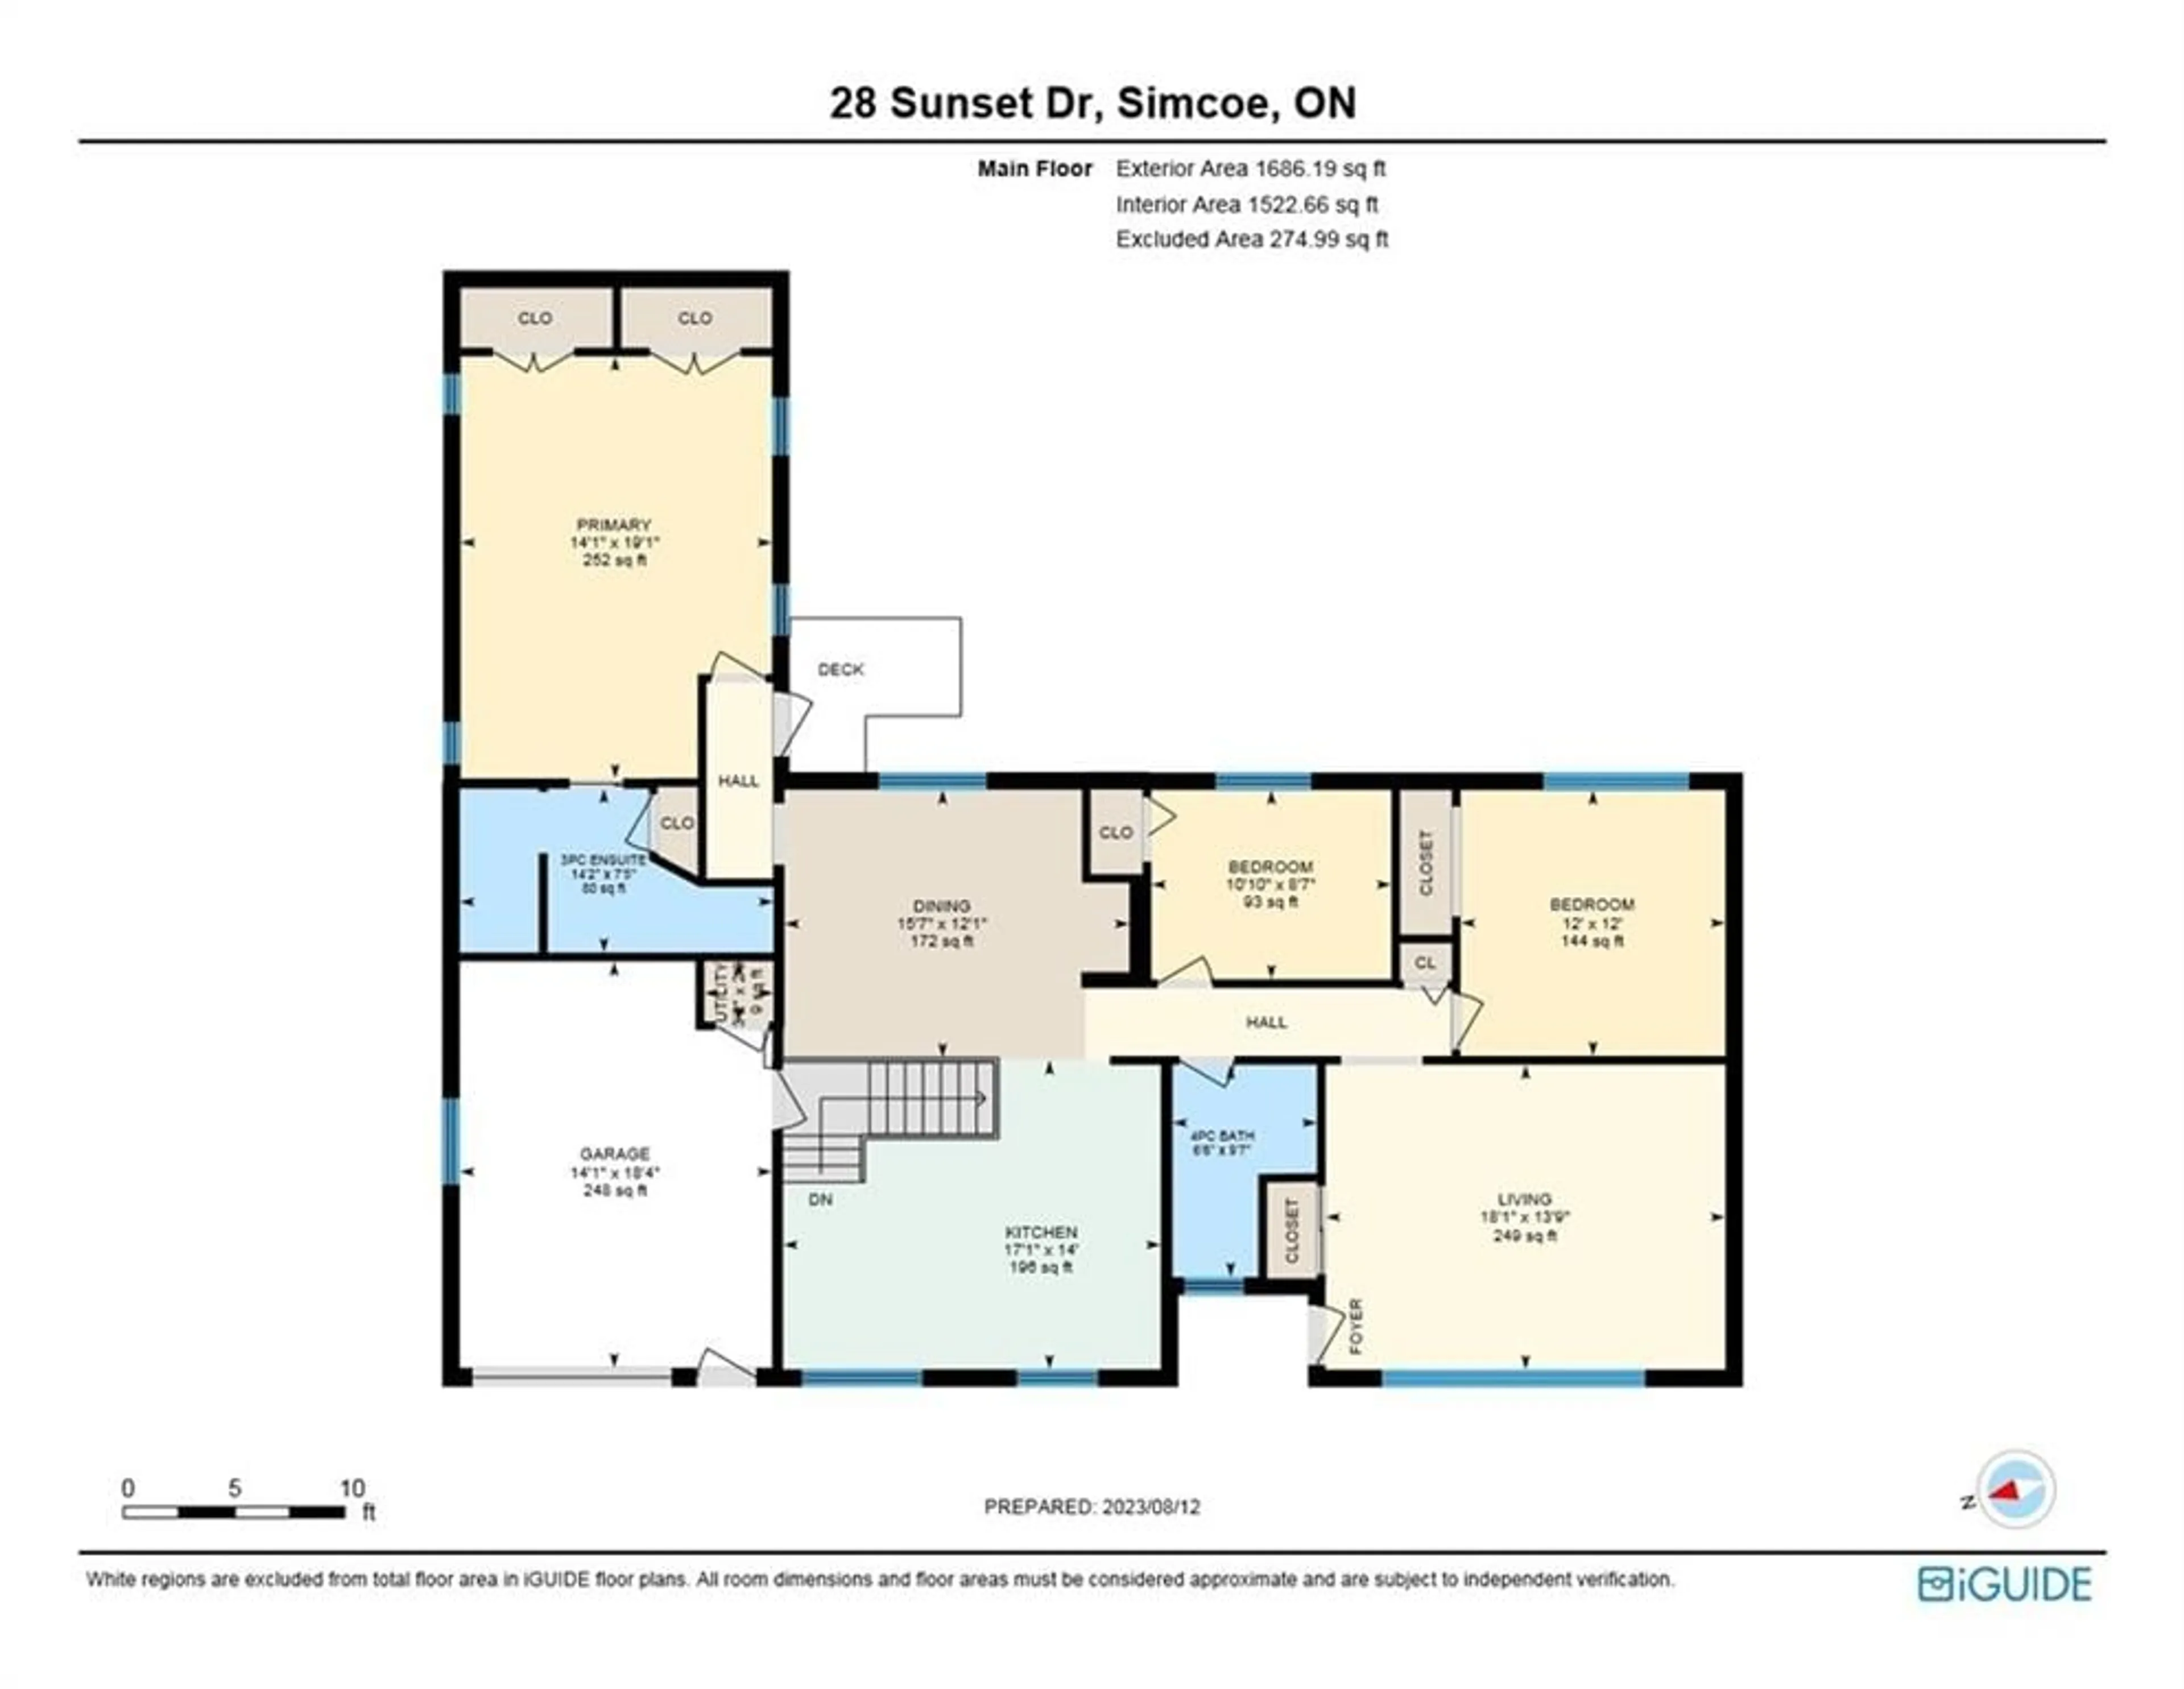 Floor plan for 28 SUNSET Dr, Simcoe Ontario N3Y 4G3